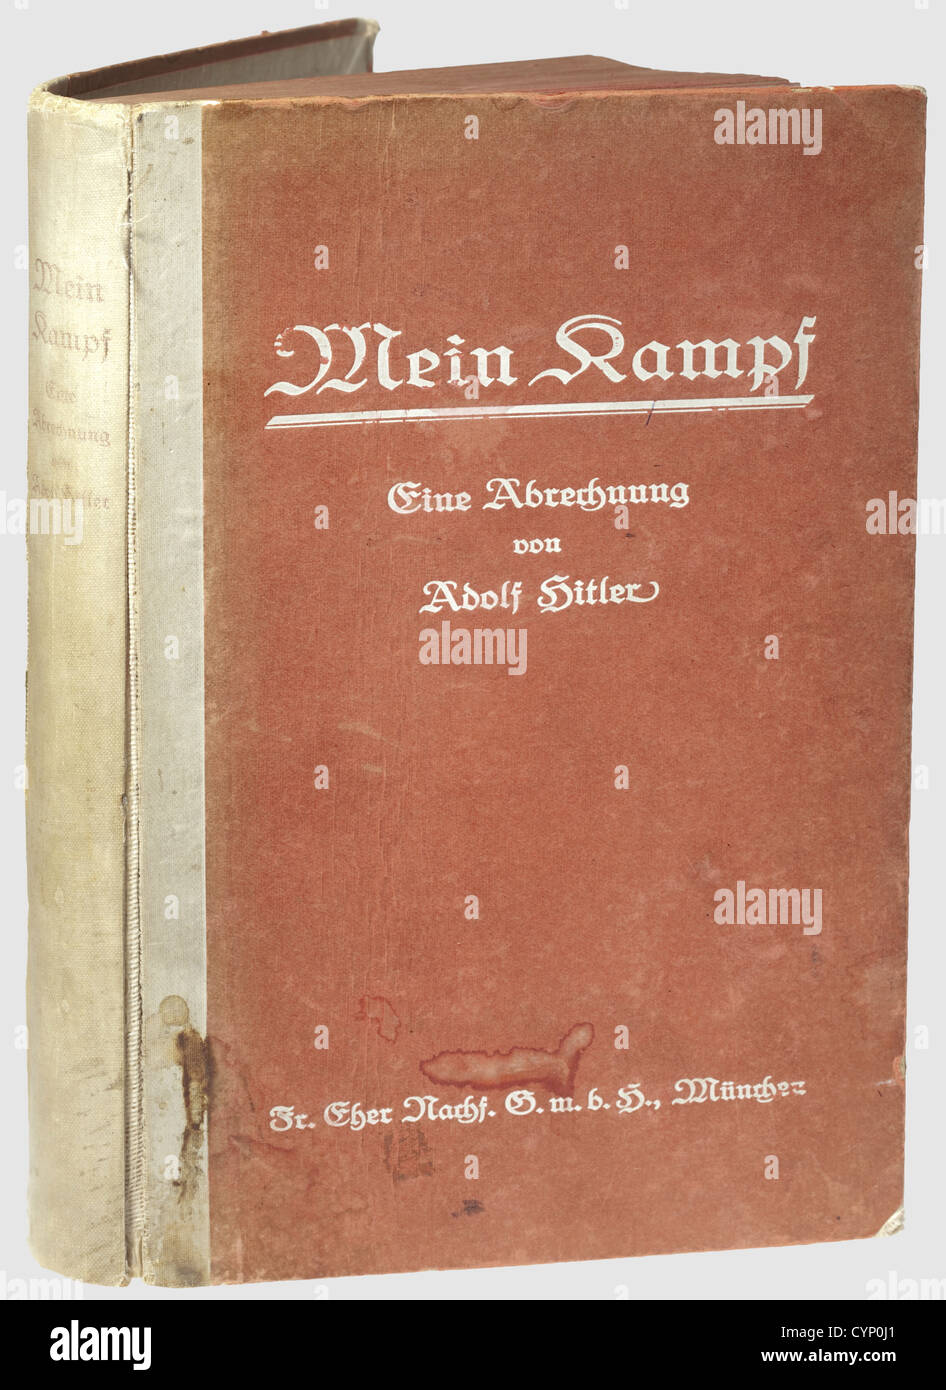 Adolf Hitler - a signed first edition of 'Mein Kampf',vol. 1,1925. The linen-covered spine slightly damaged,the front cover stained. The flyleaf with handwritten ink signature on the upper right 'Adolf Hitler - München den 16/November 1925',underneath the English inscription 'N.B. The signature above is that of Adolf Hitler,Munich 16 Nov. 1925 - Book taken from a killed German soldier whose blood spots the front cover.(P. Hans Dombrowski)' with the signature of Private 'Hugo(???)',historic,historical,1920s,20th century,NS,National Socialism,Nazism,Additional-Rights-Clearences-Not Available Stock Photo